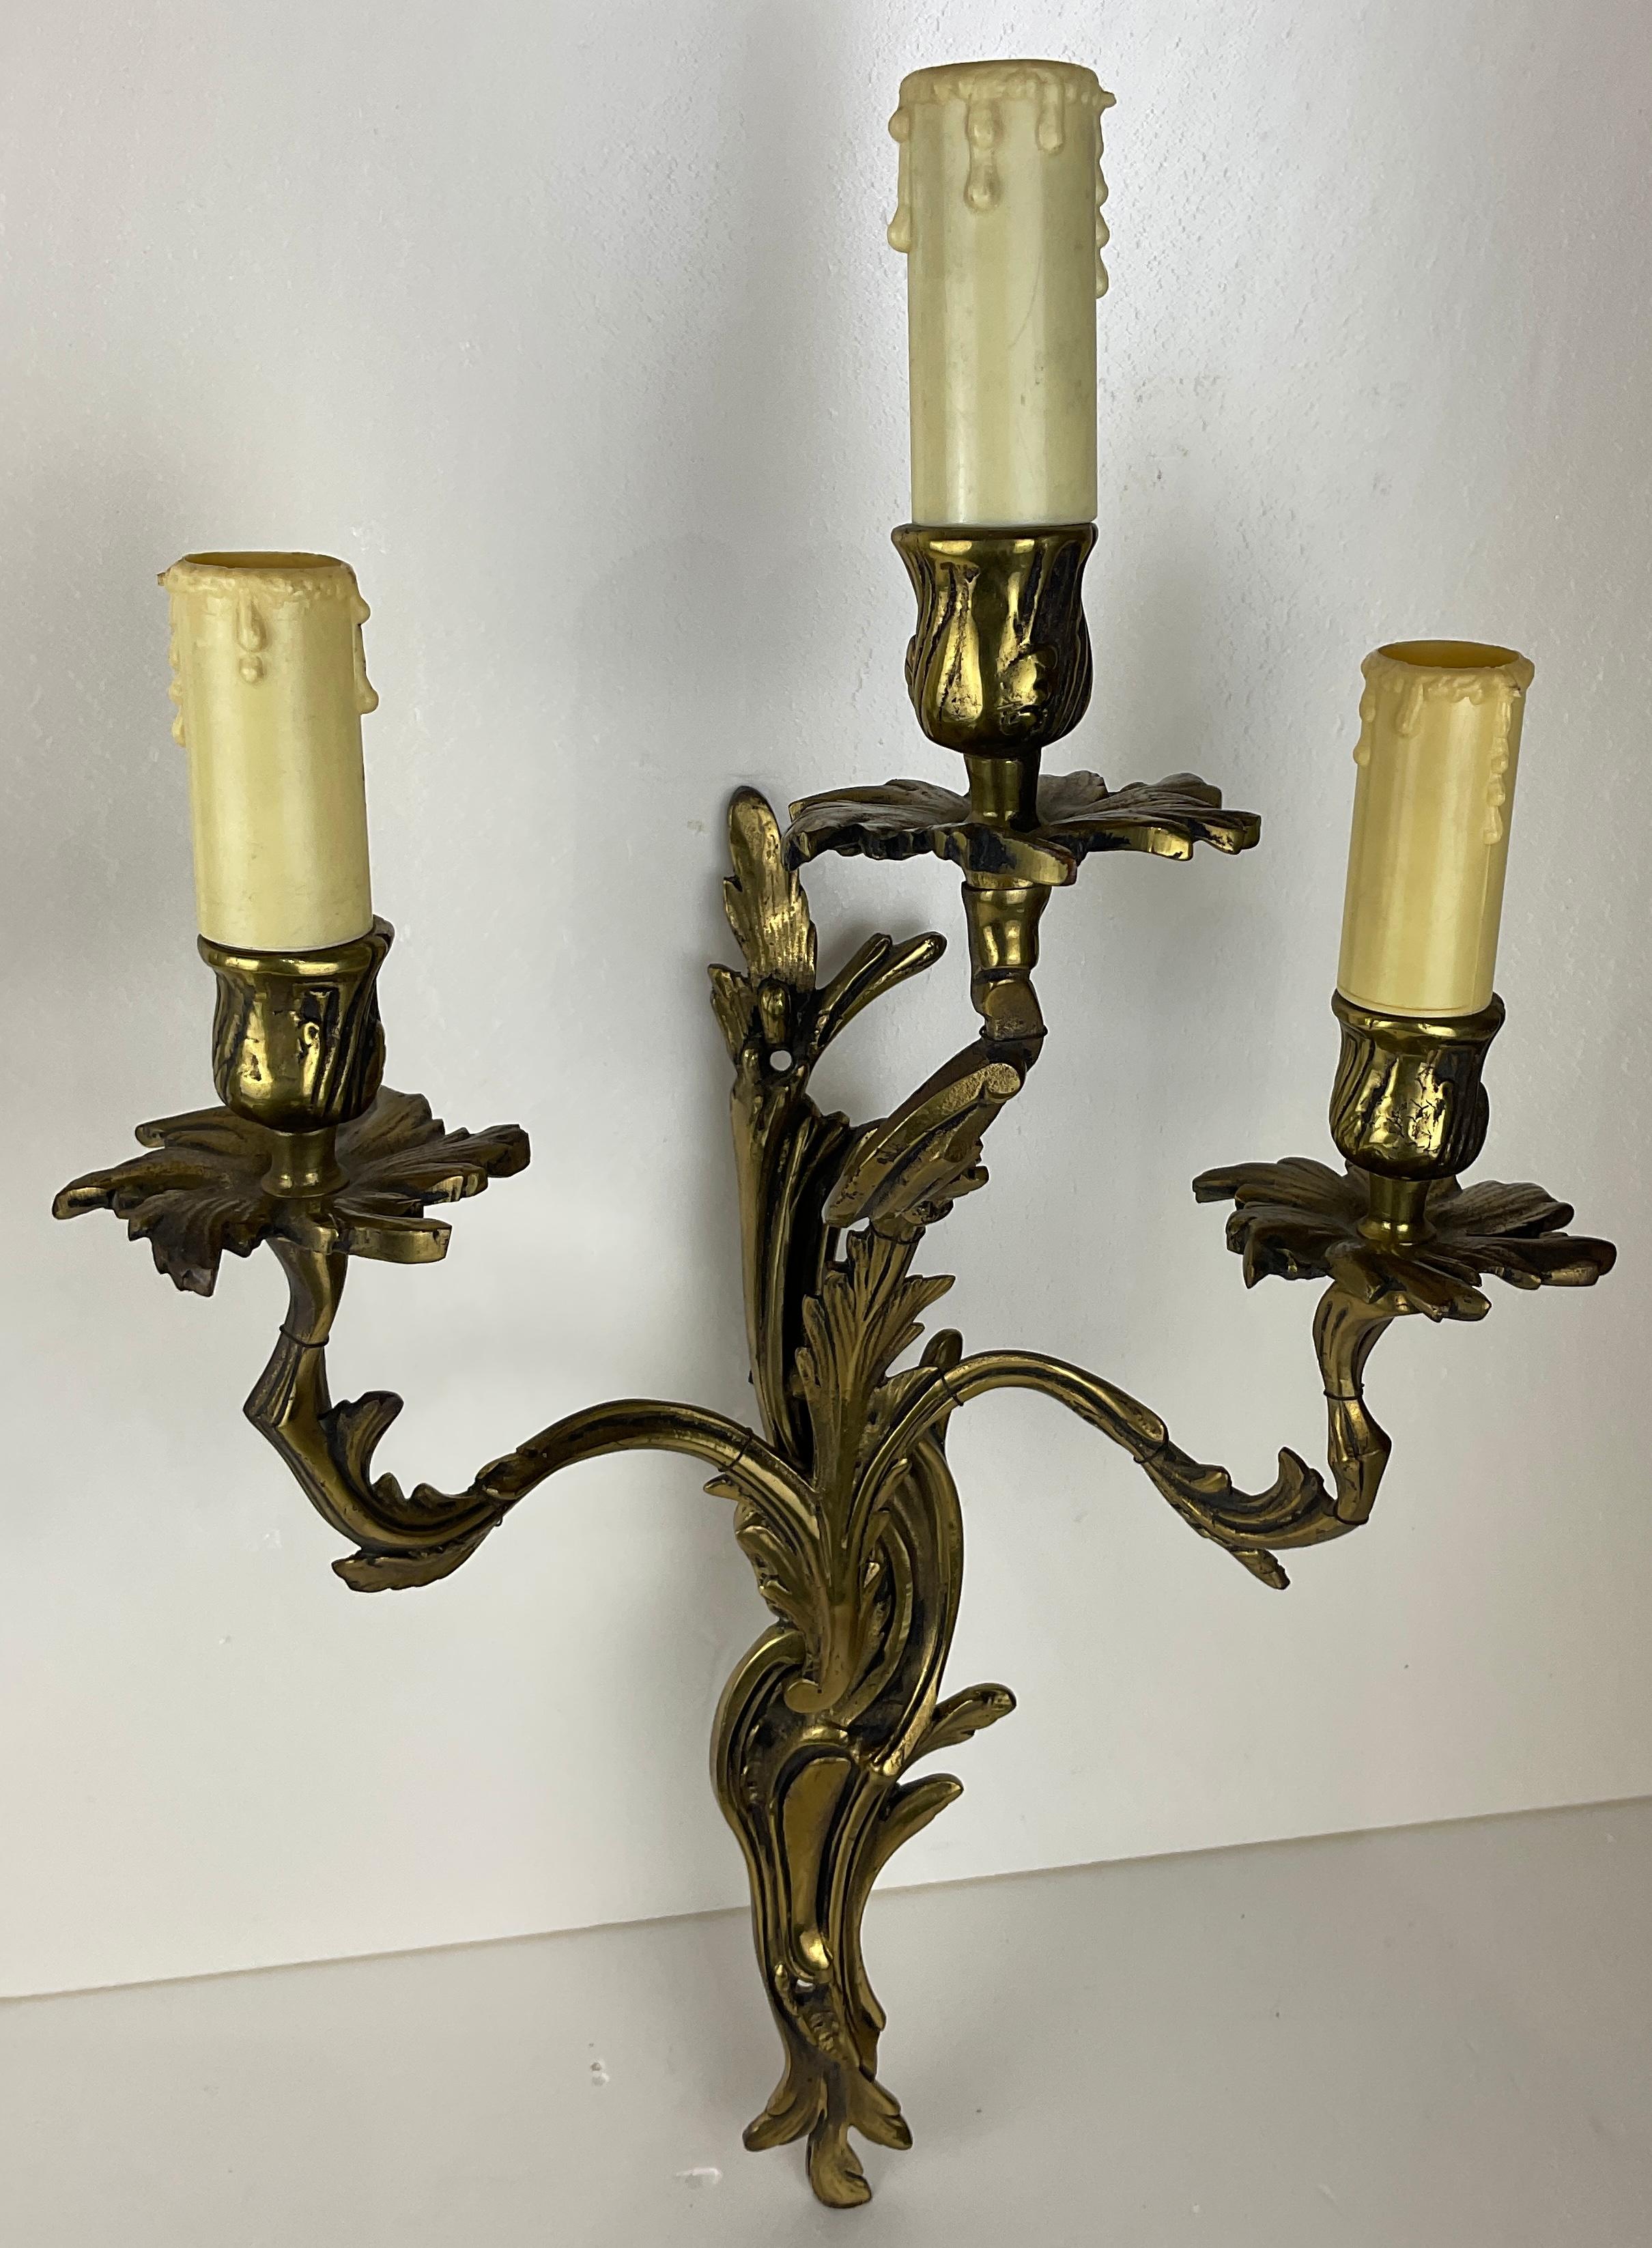 Pair of French Louis XV rococo style gilded bronze double arm wall sconces, in very good antique condition. 
Beautiful decorative floral and leaf tiered scrolling arms. 

Very good quality and well cast.
Electrified.

Dimensions: 5 3/4